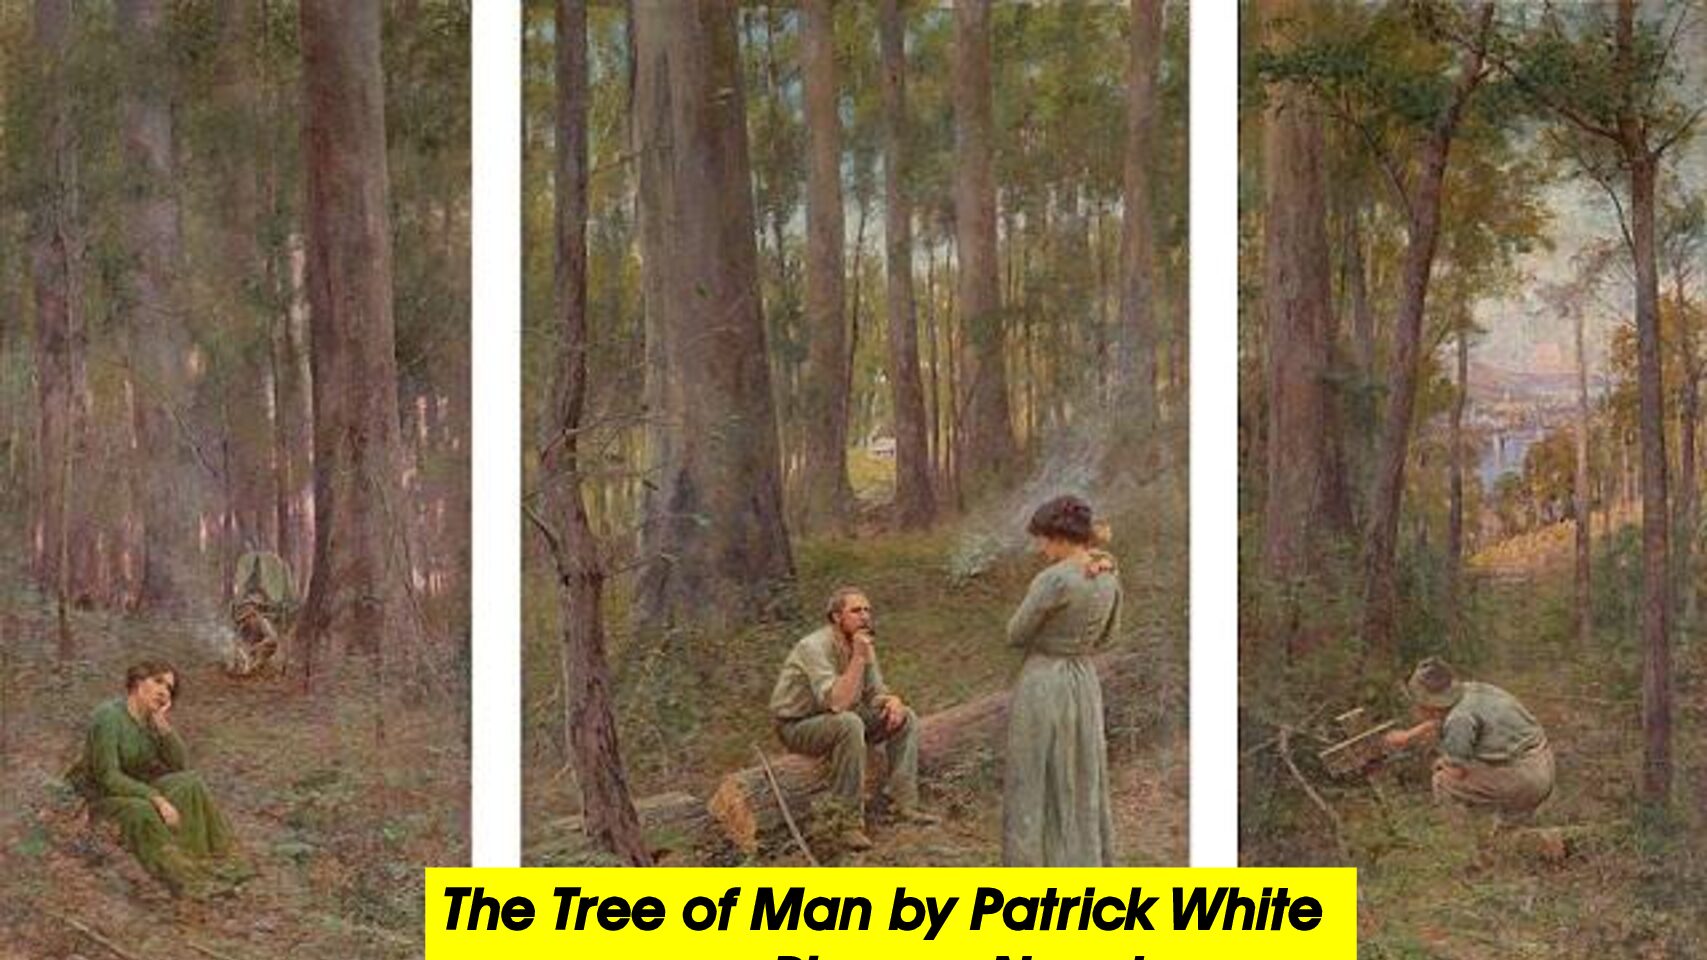 Consider The Tree of Man by Patrick White as a pioneer novel